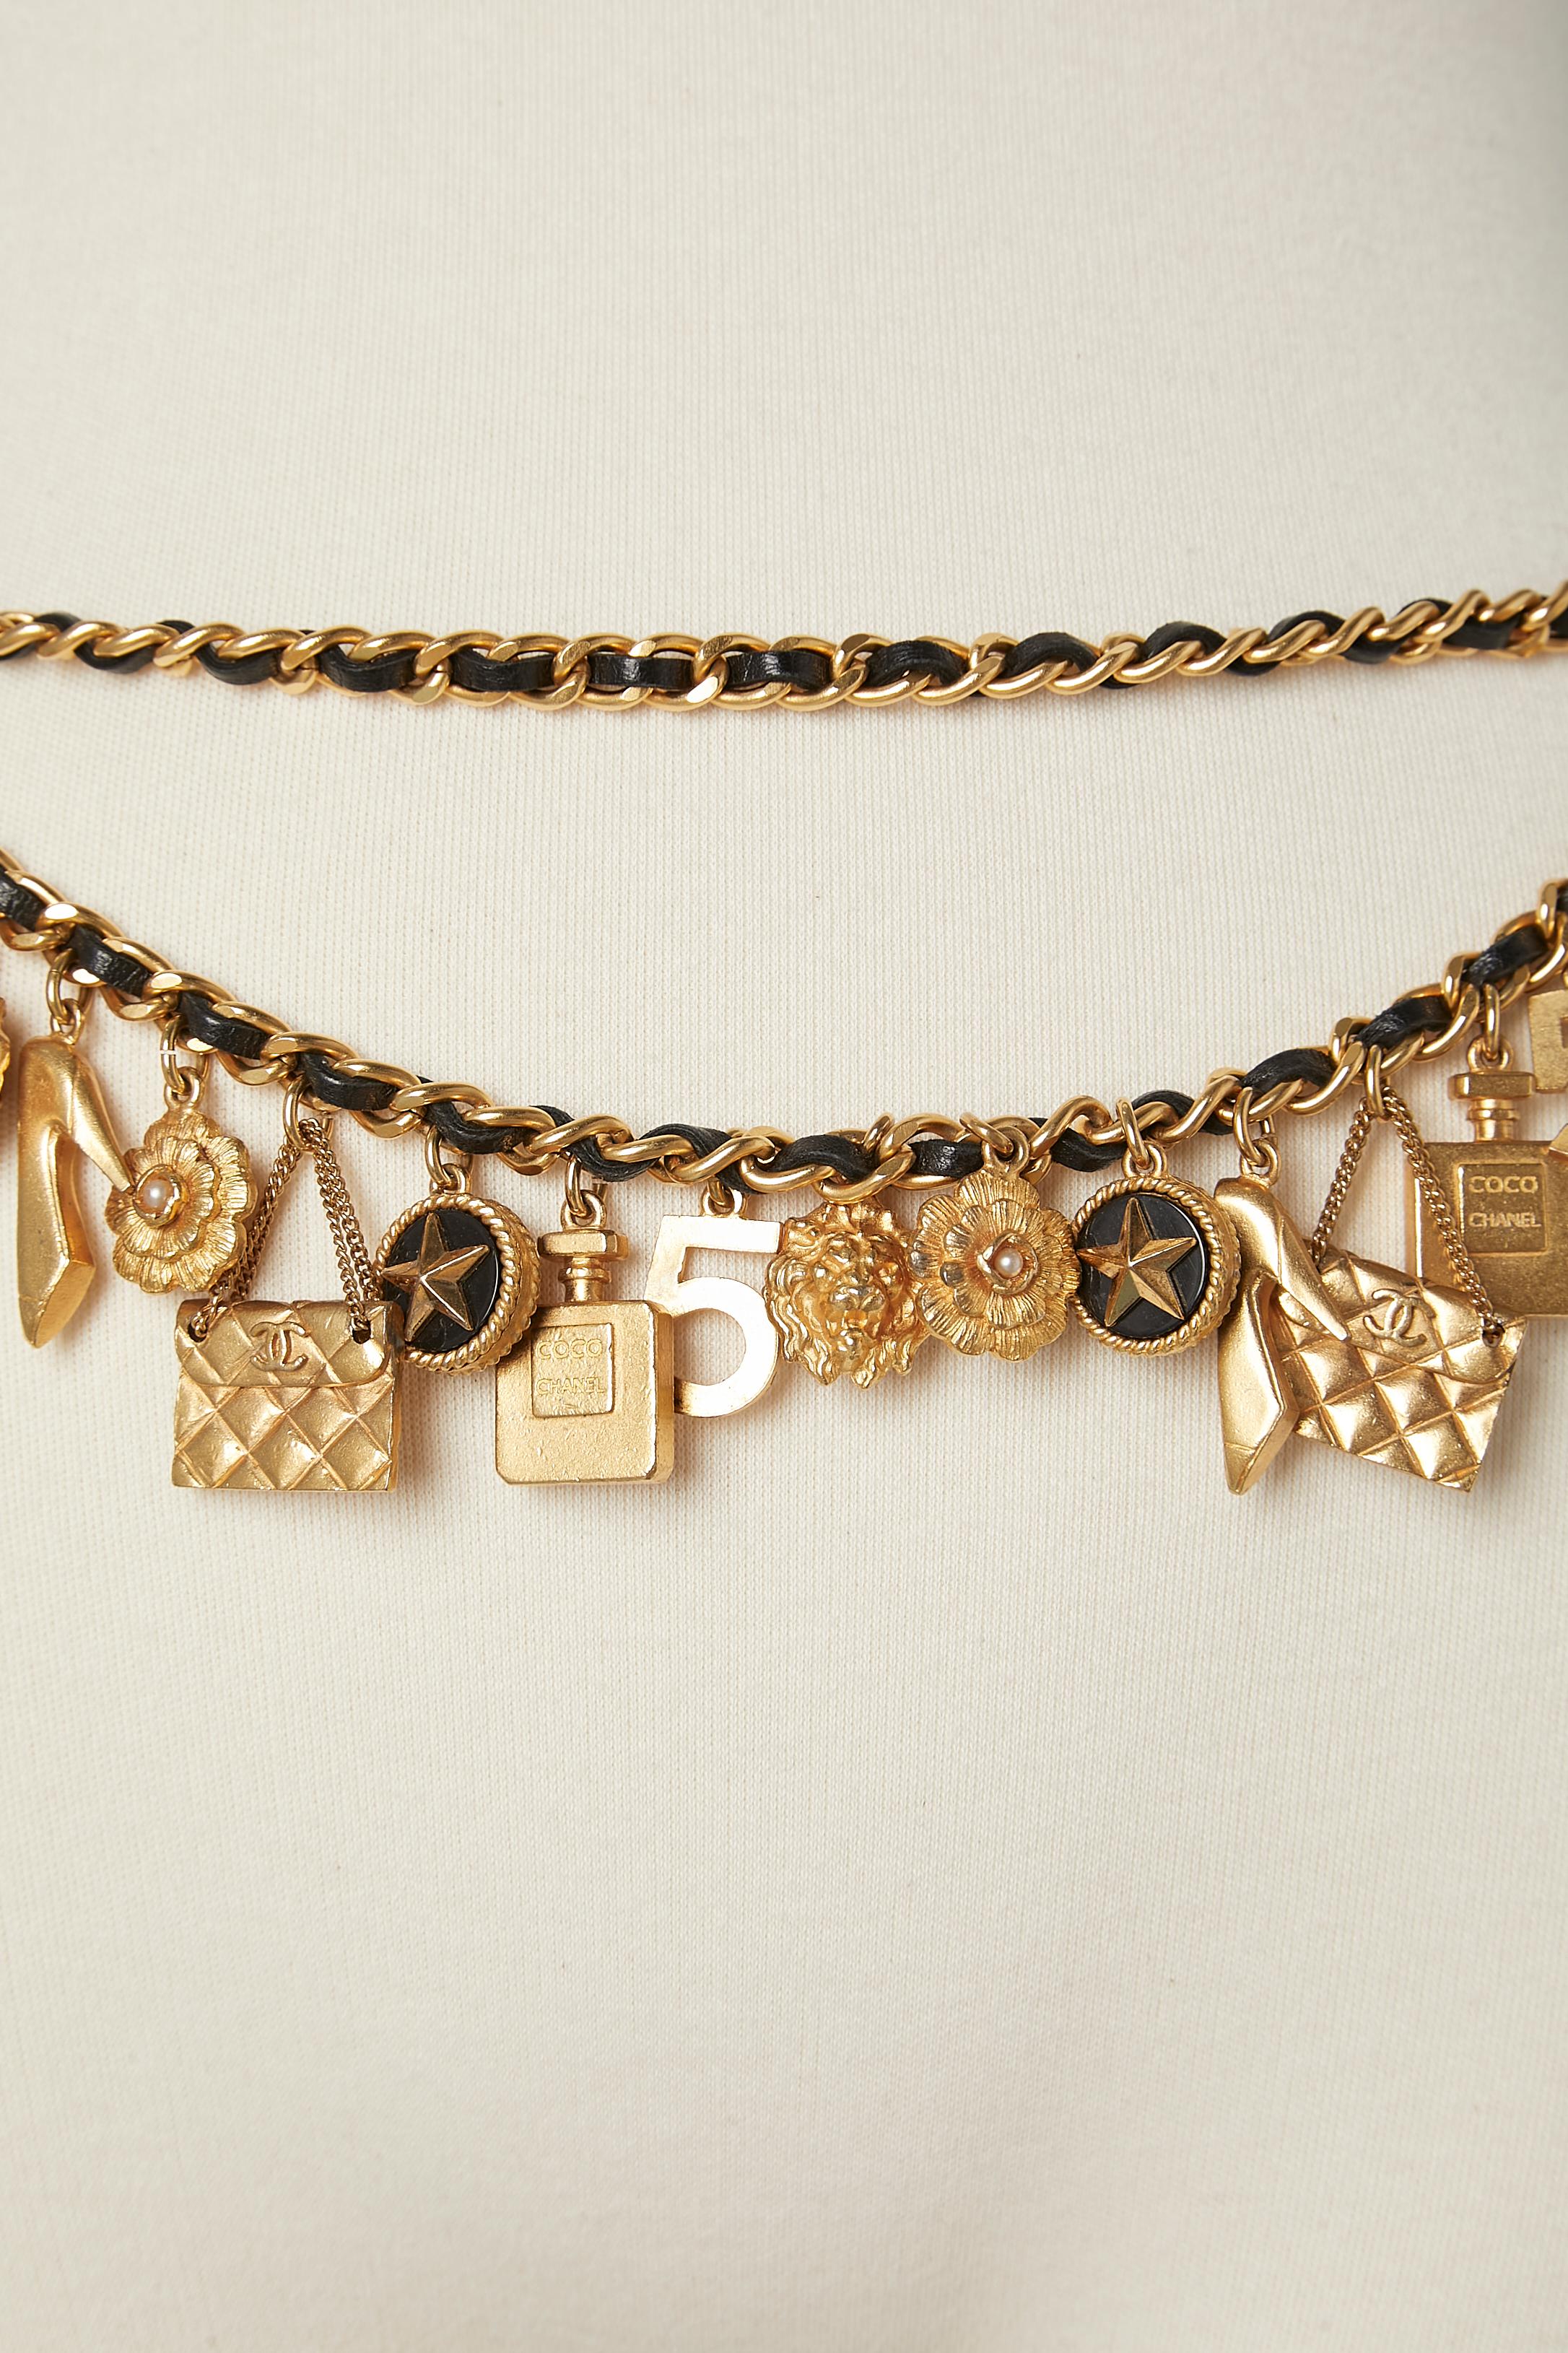 Iconic gold metal charm's on chain and black leather belt  Chanel Circa 1990's  1